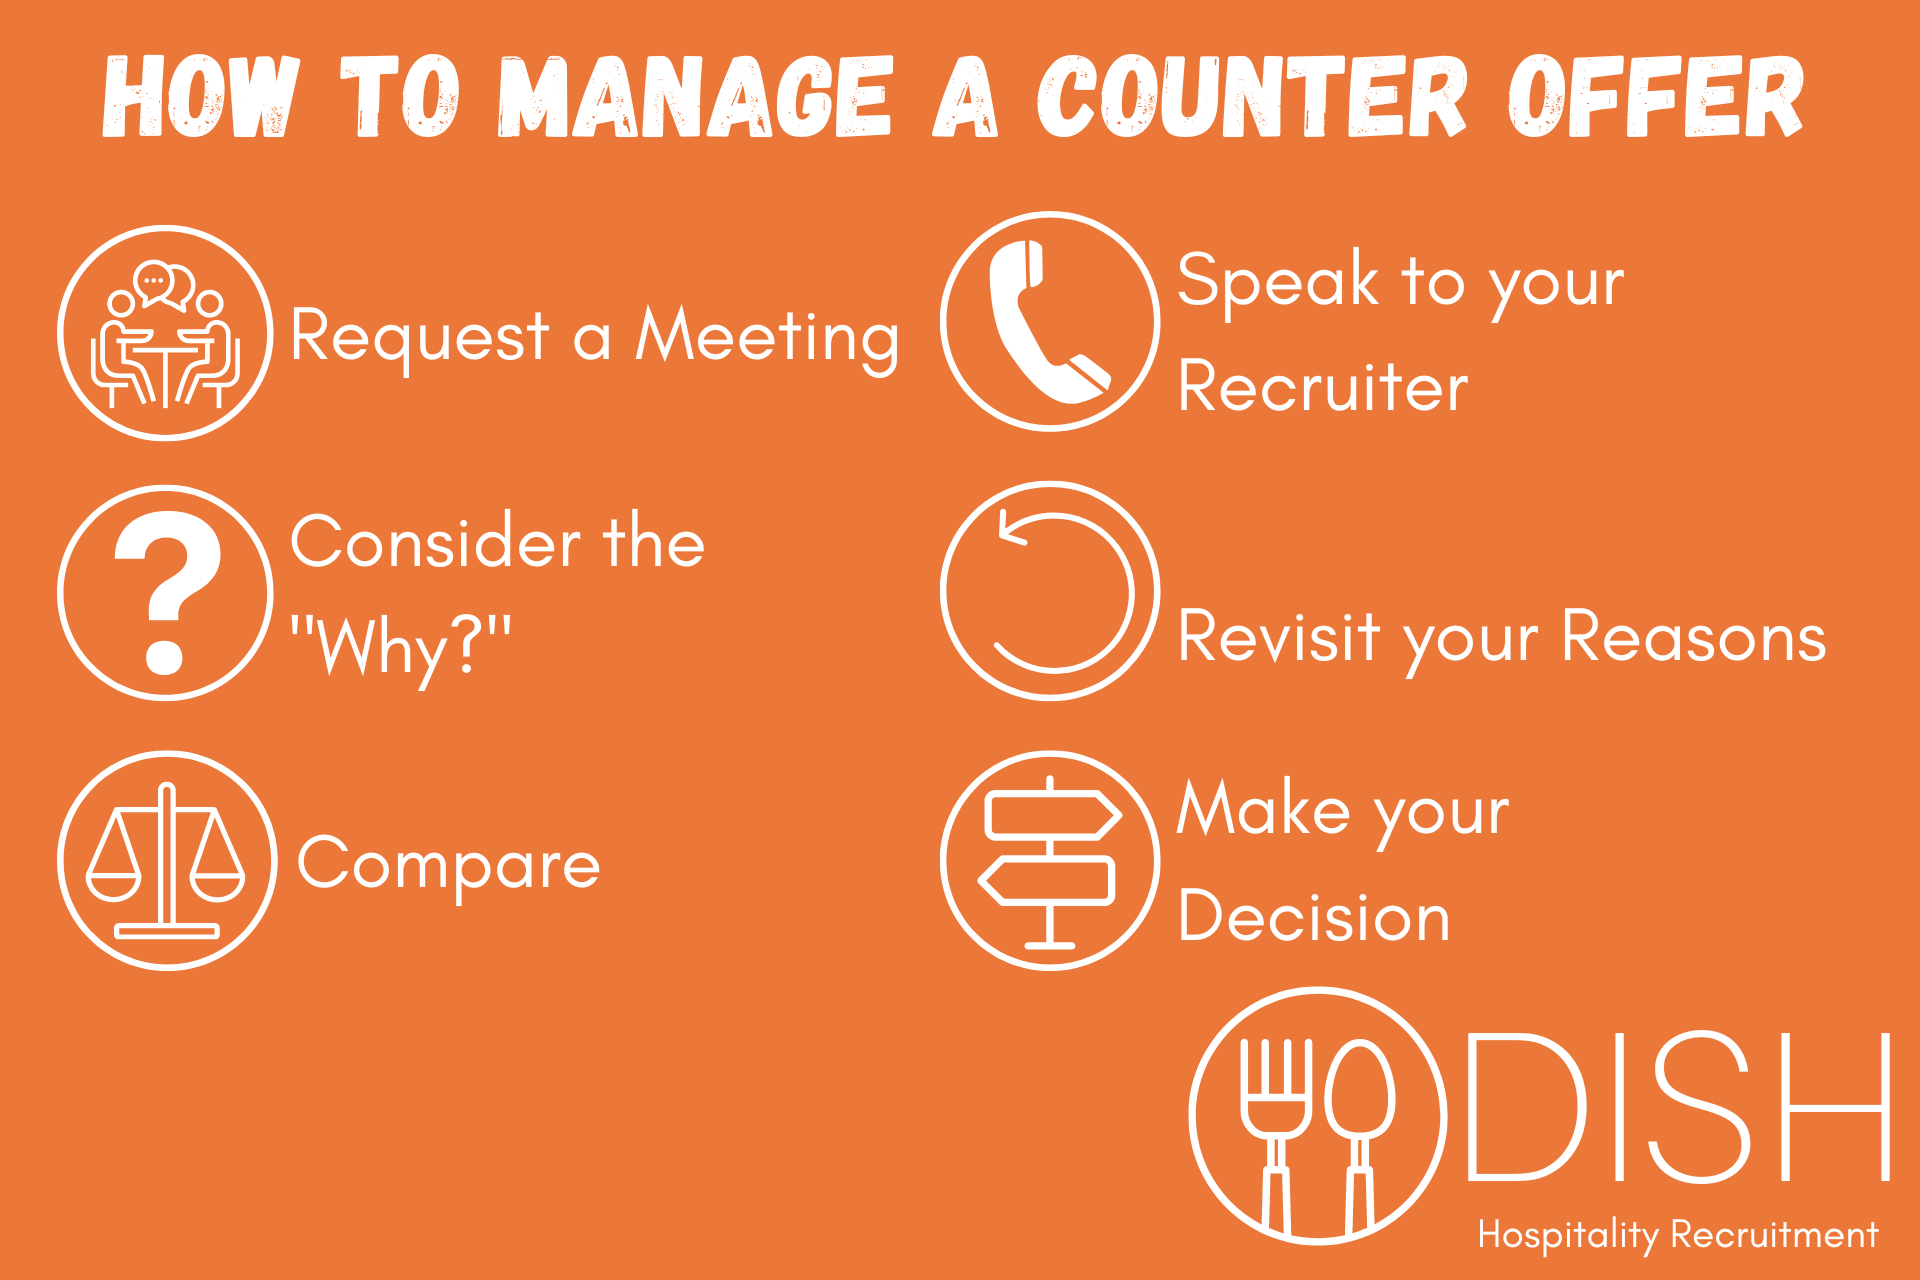 How to Manage a Counter Offer